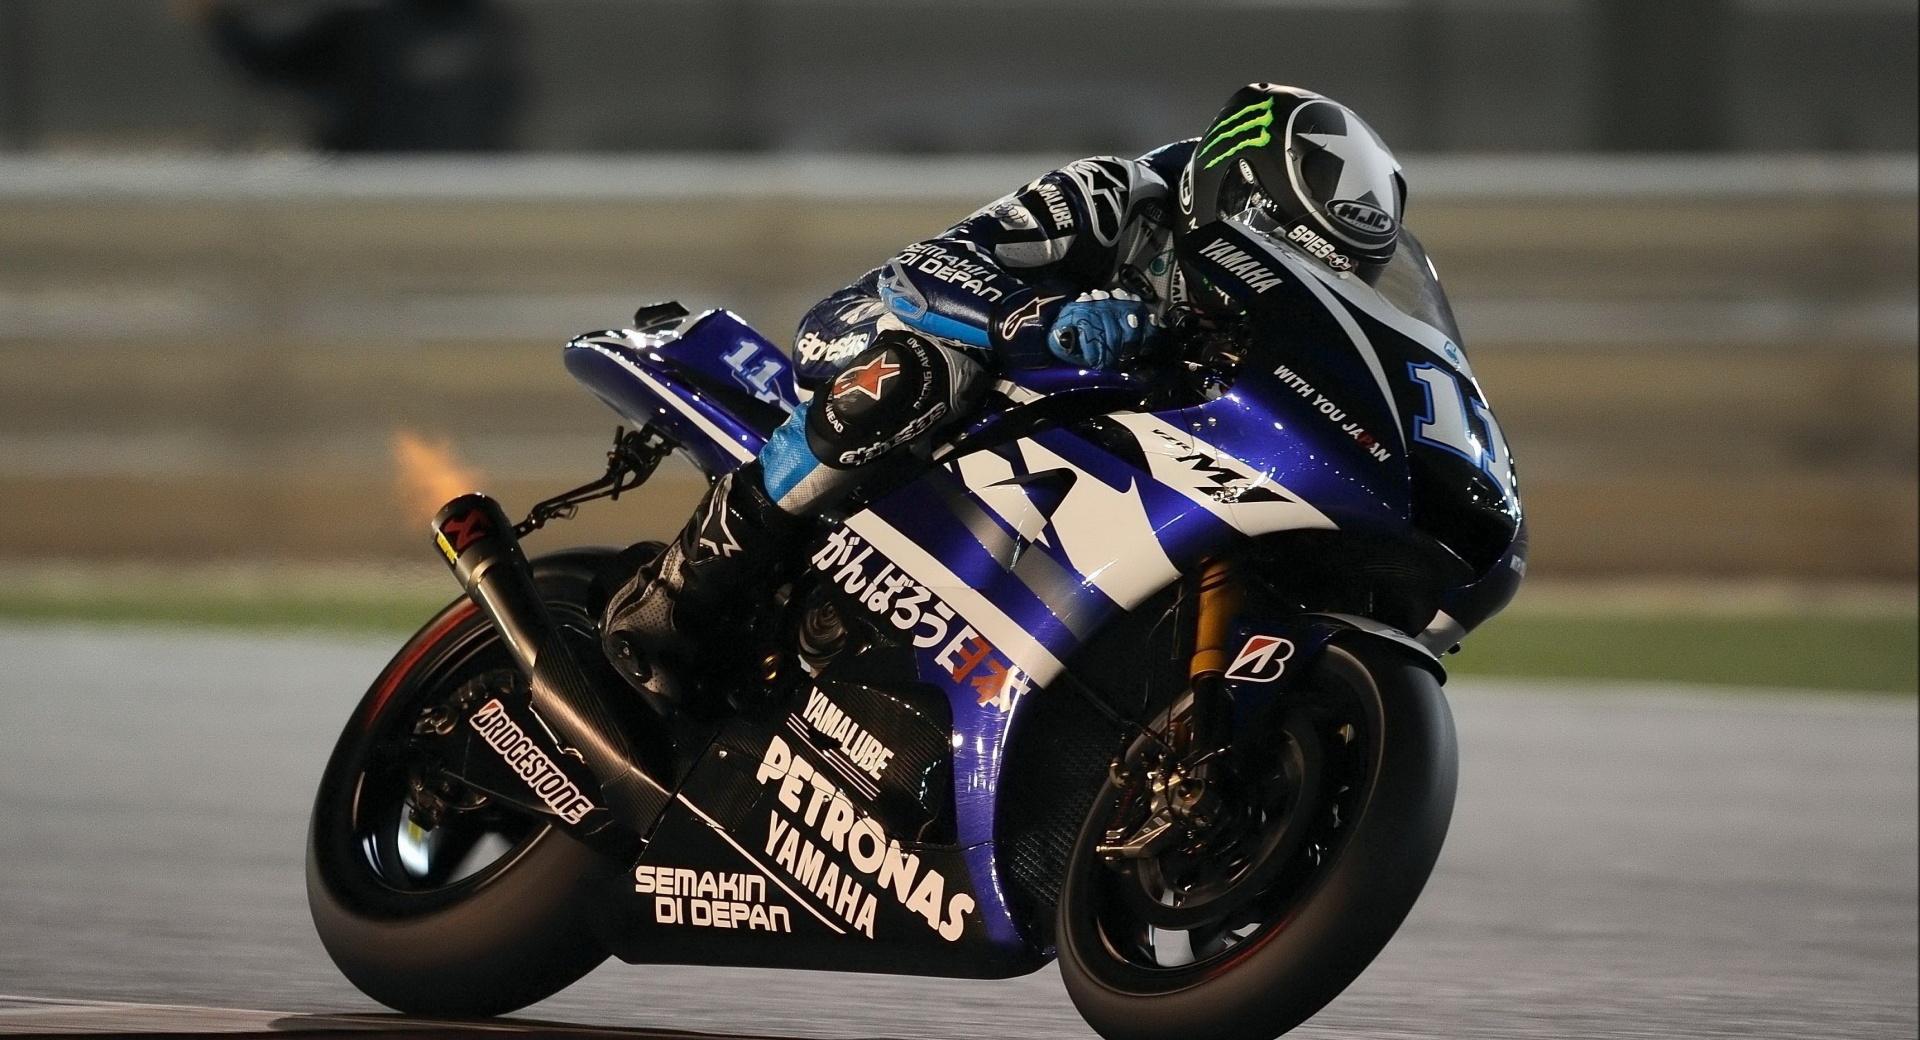 Yamaha Yzr M1 On Race Track wallpapers HD quality